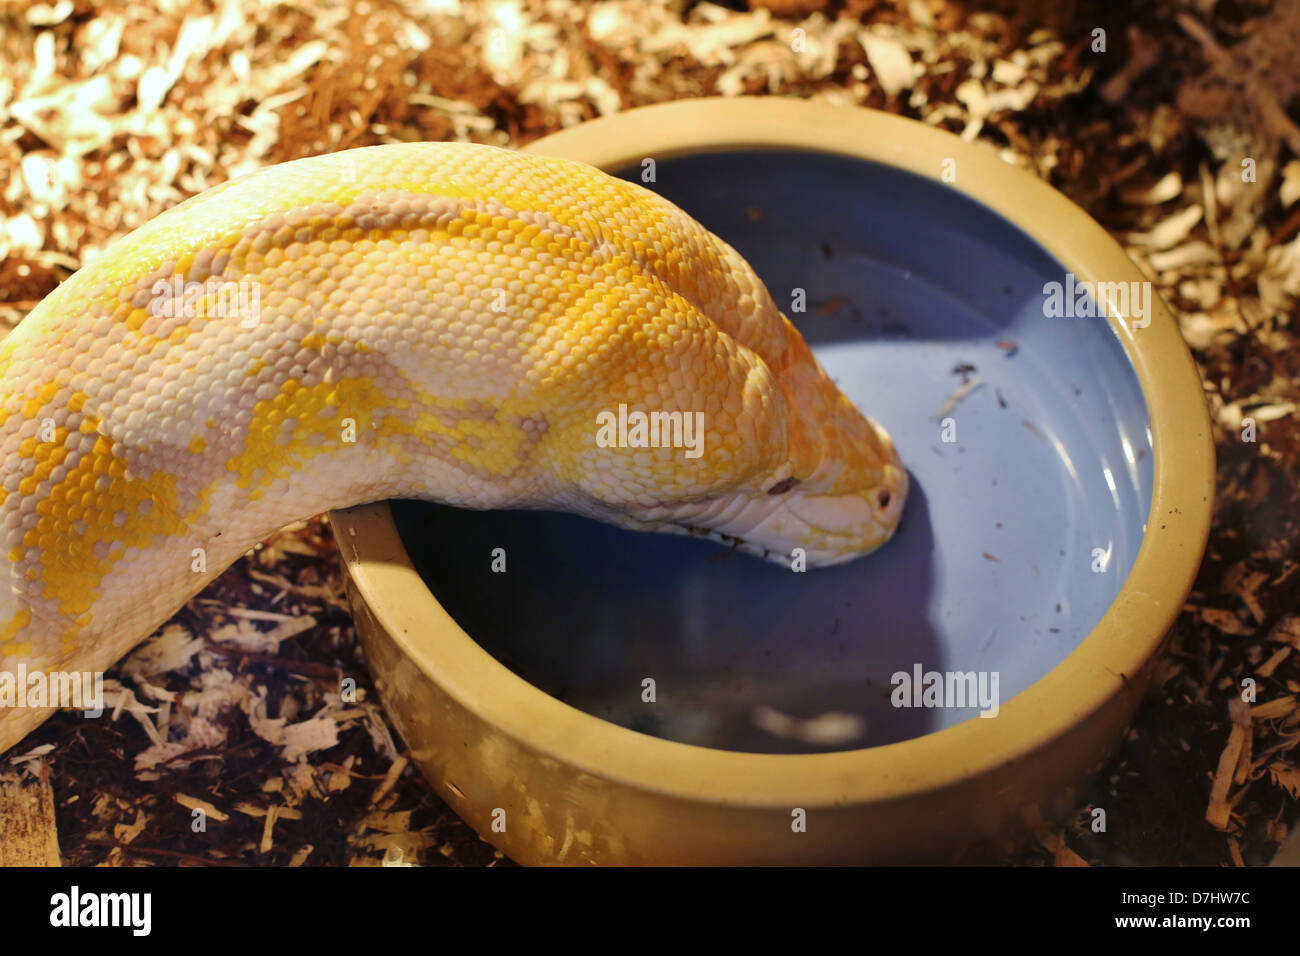 https://c8.alamy.com/comp/D7HW7C/a-captive-python-snake-drinking-water-out-of-a-dish-D7HW7C.jpg